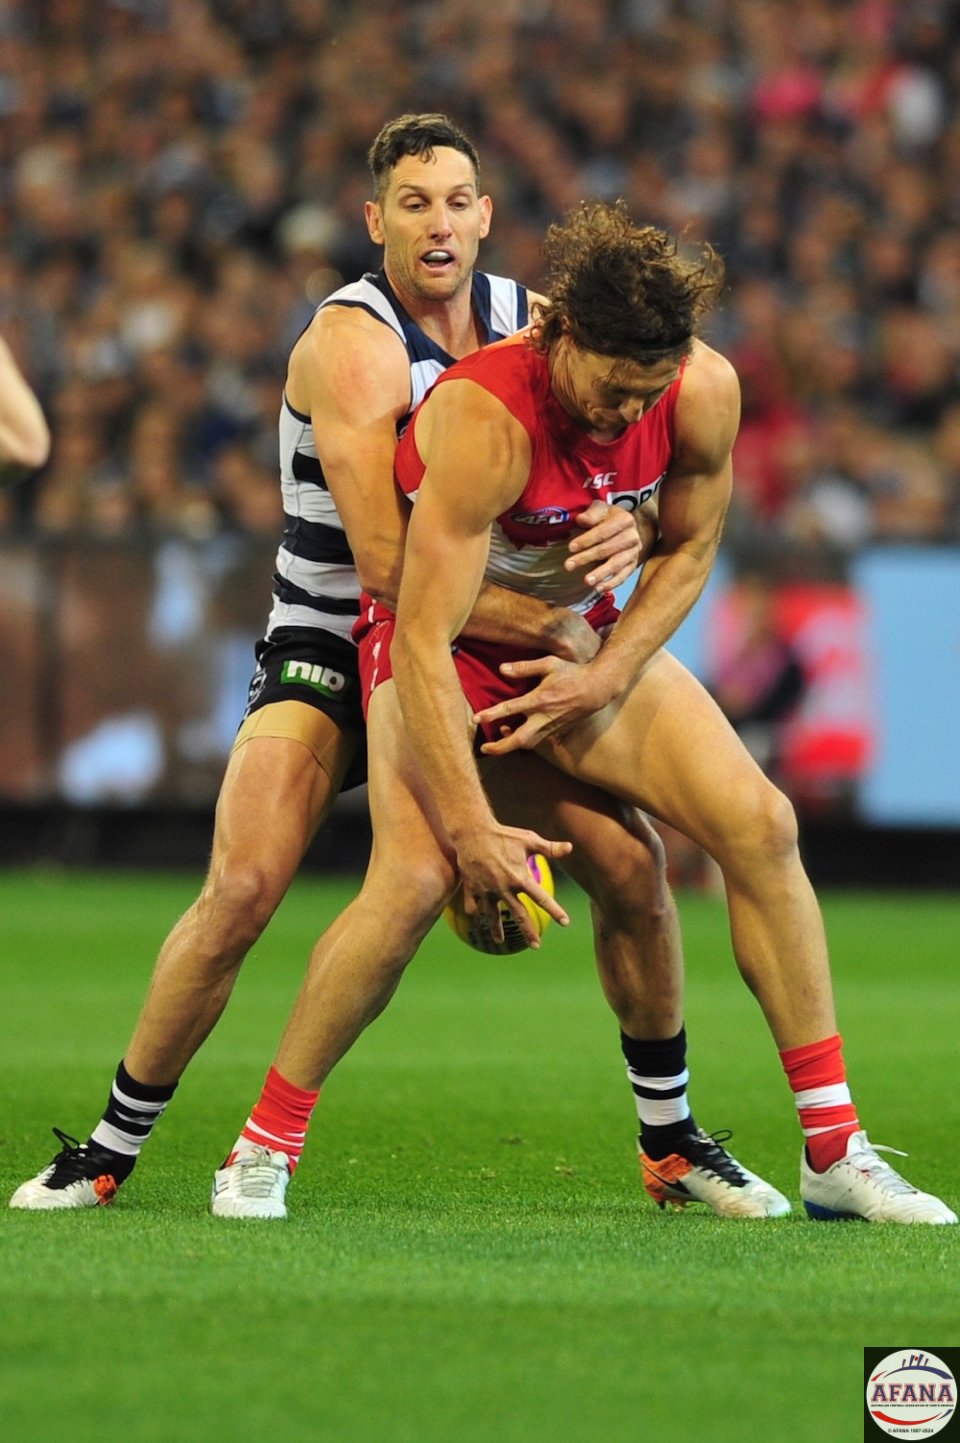 Tippett and Taylor contest the ball in